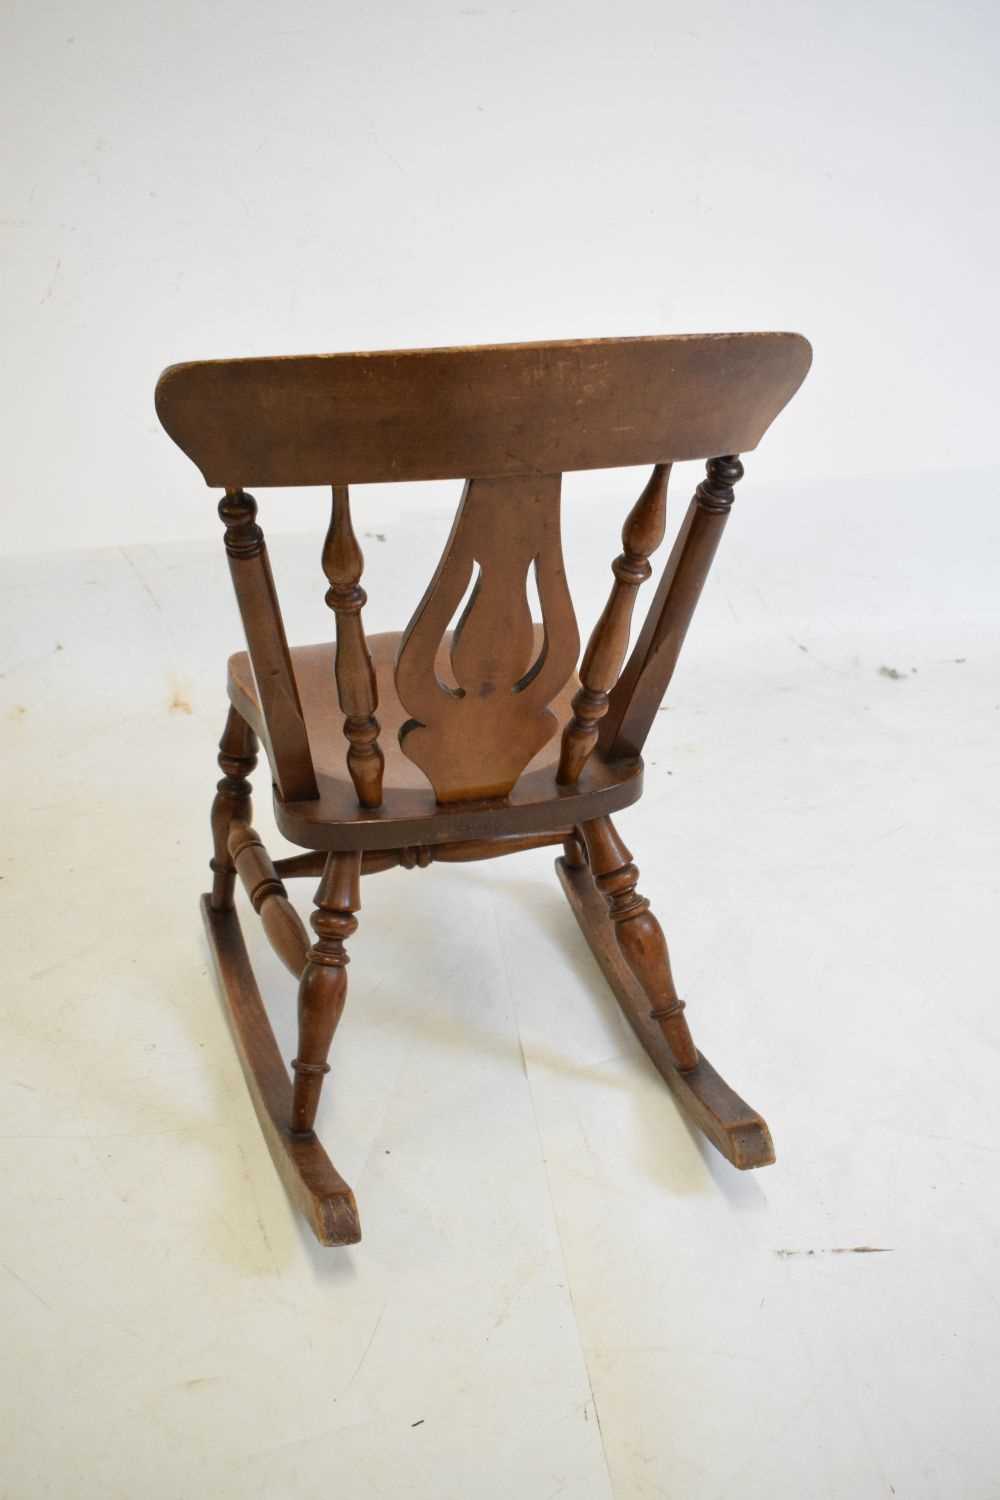 Late 19th Century child's rocking chair - Image 3 of 4